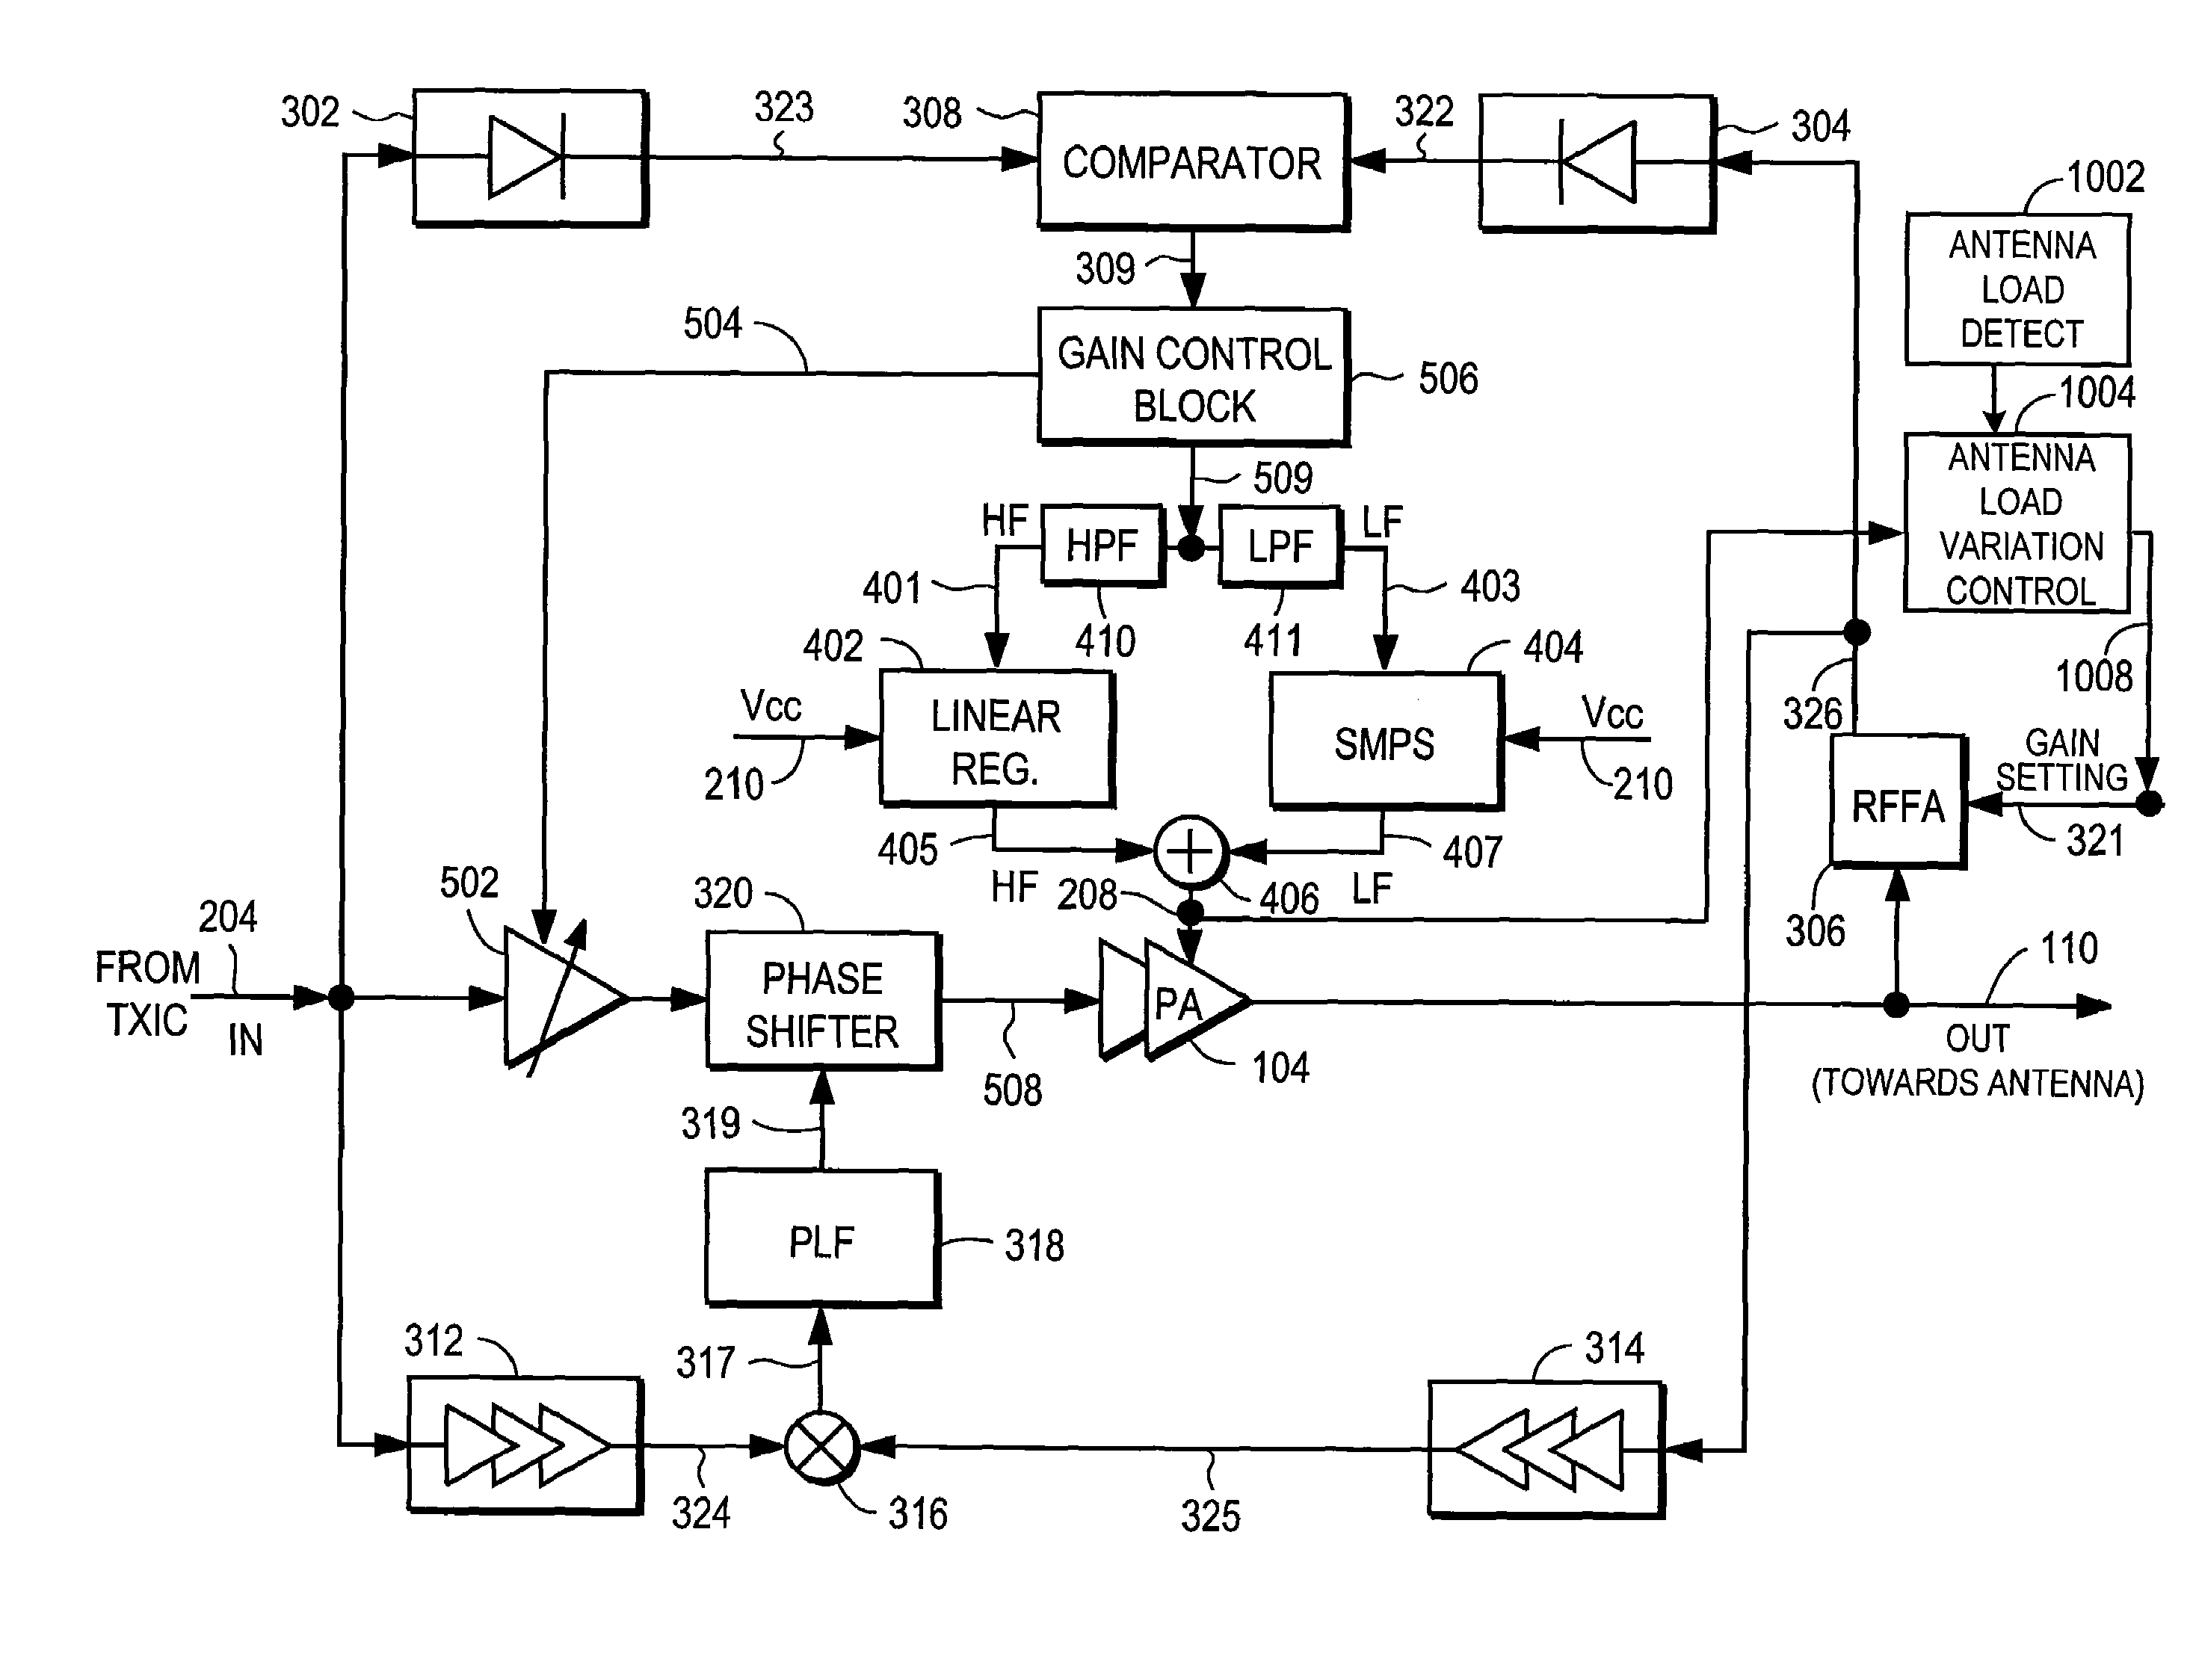 RF power amplifier controller circuit with compensation for output impedance mismatch